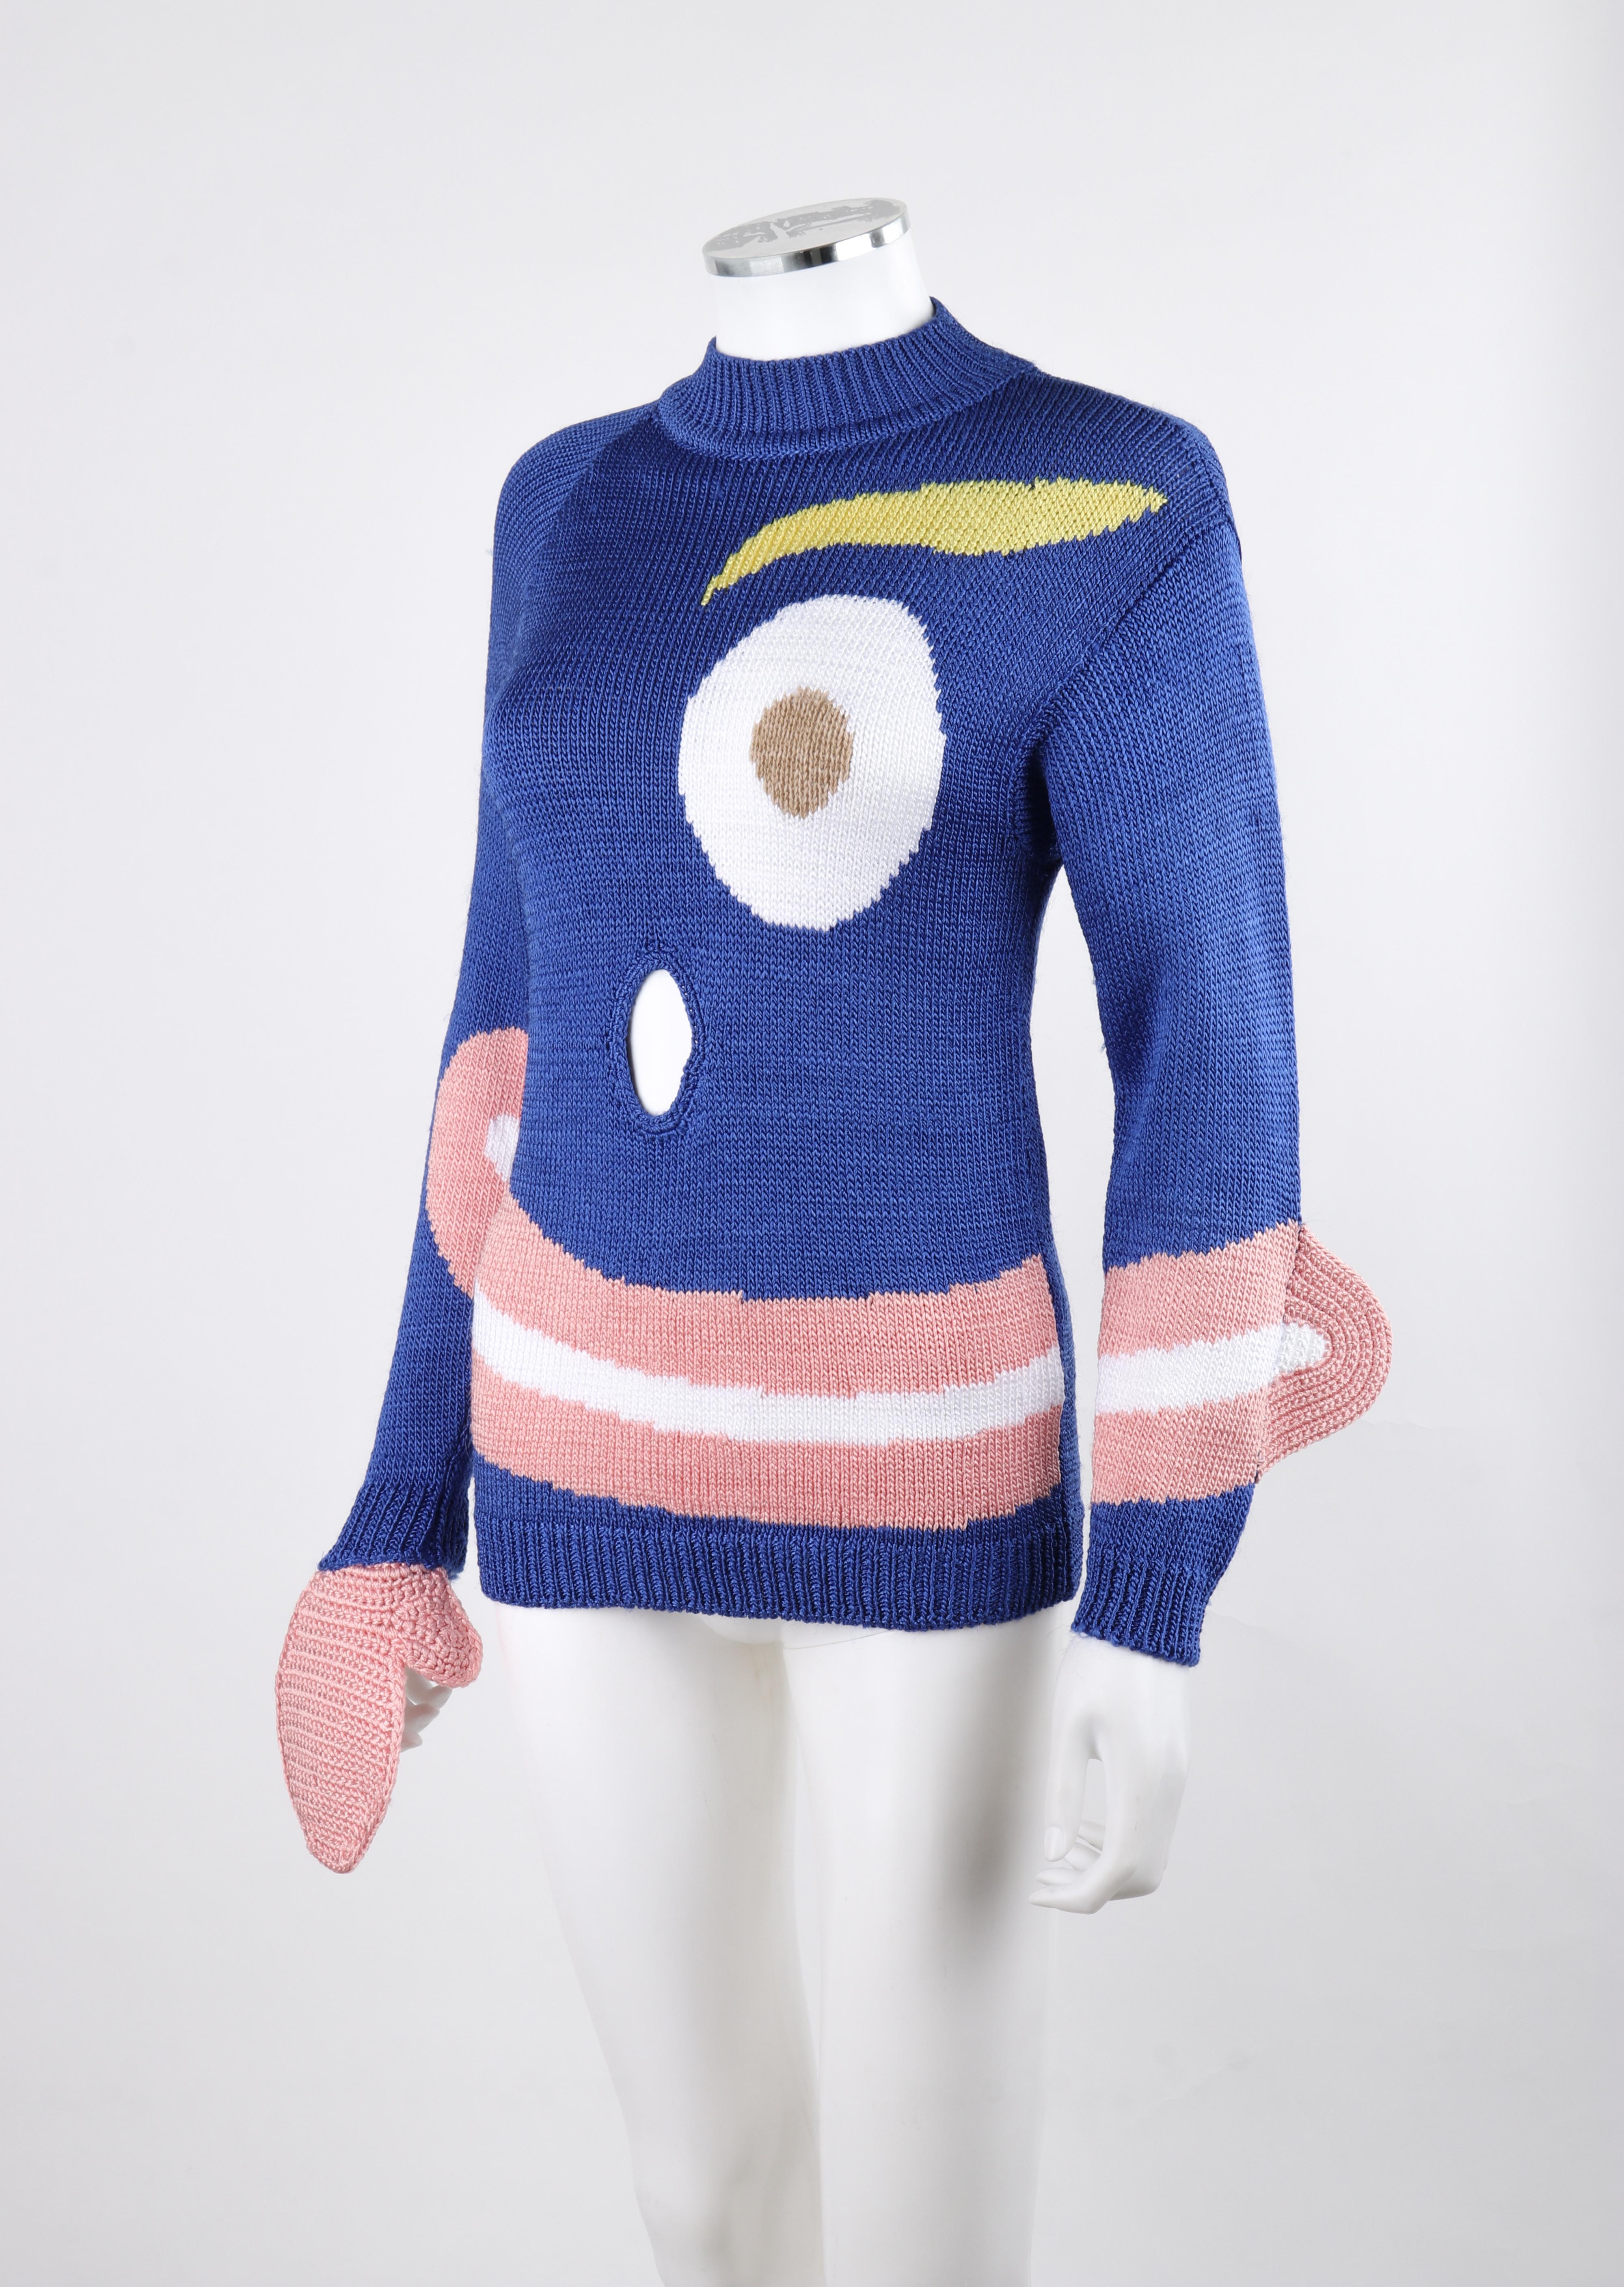 SURVIVAL OF THE FASHIONEST S/S 2020 Blue Knit Smiley Face Pullover Sweater Top S For Sale 5